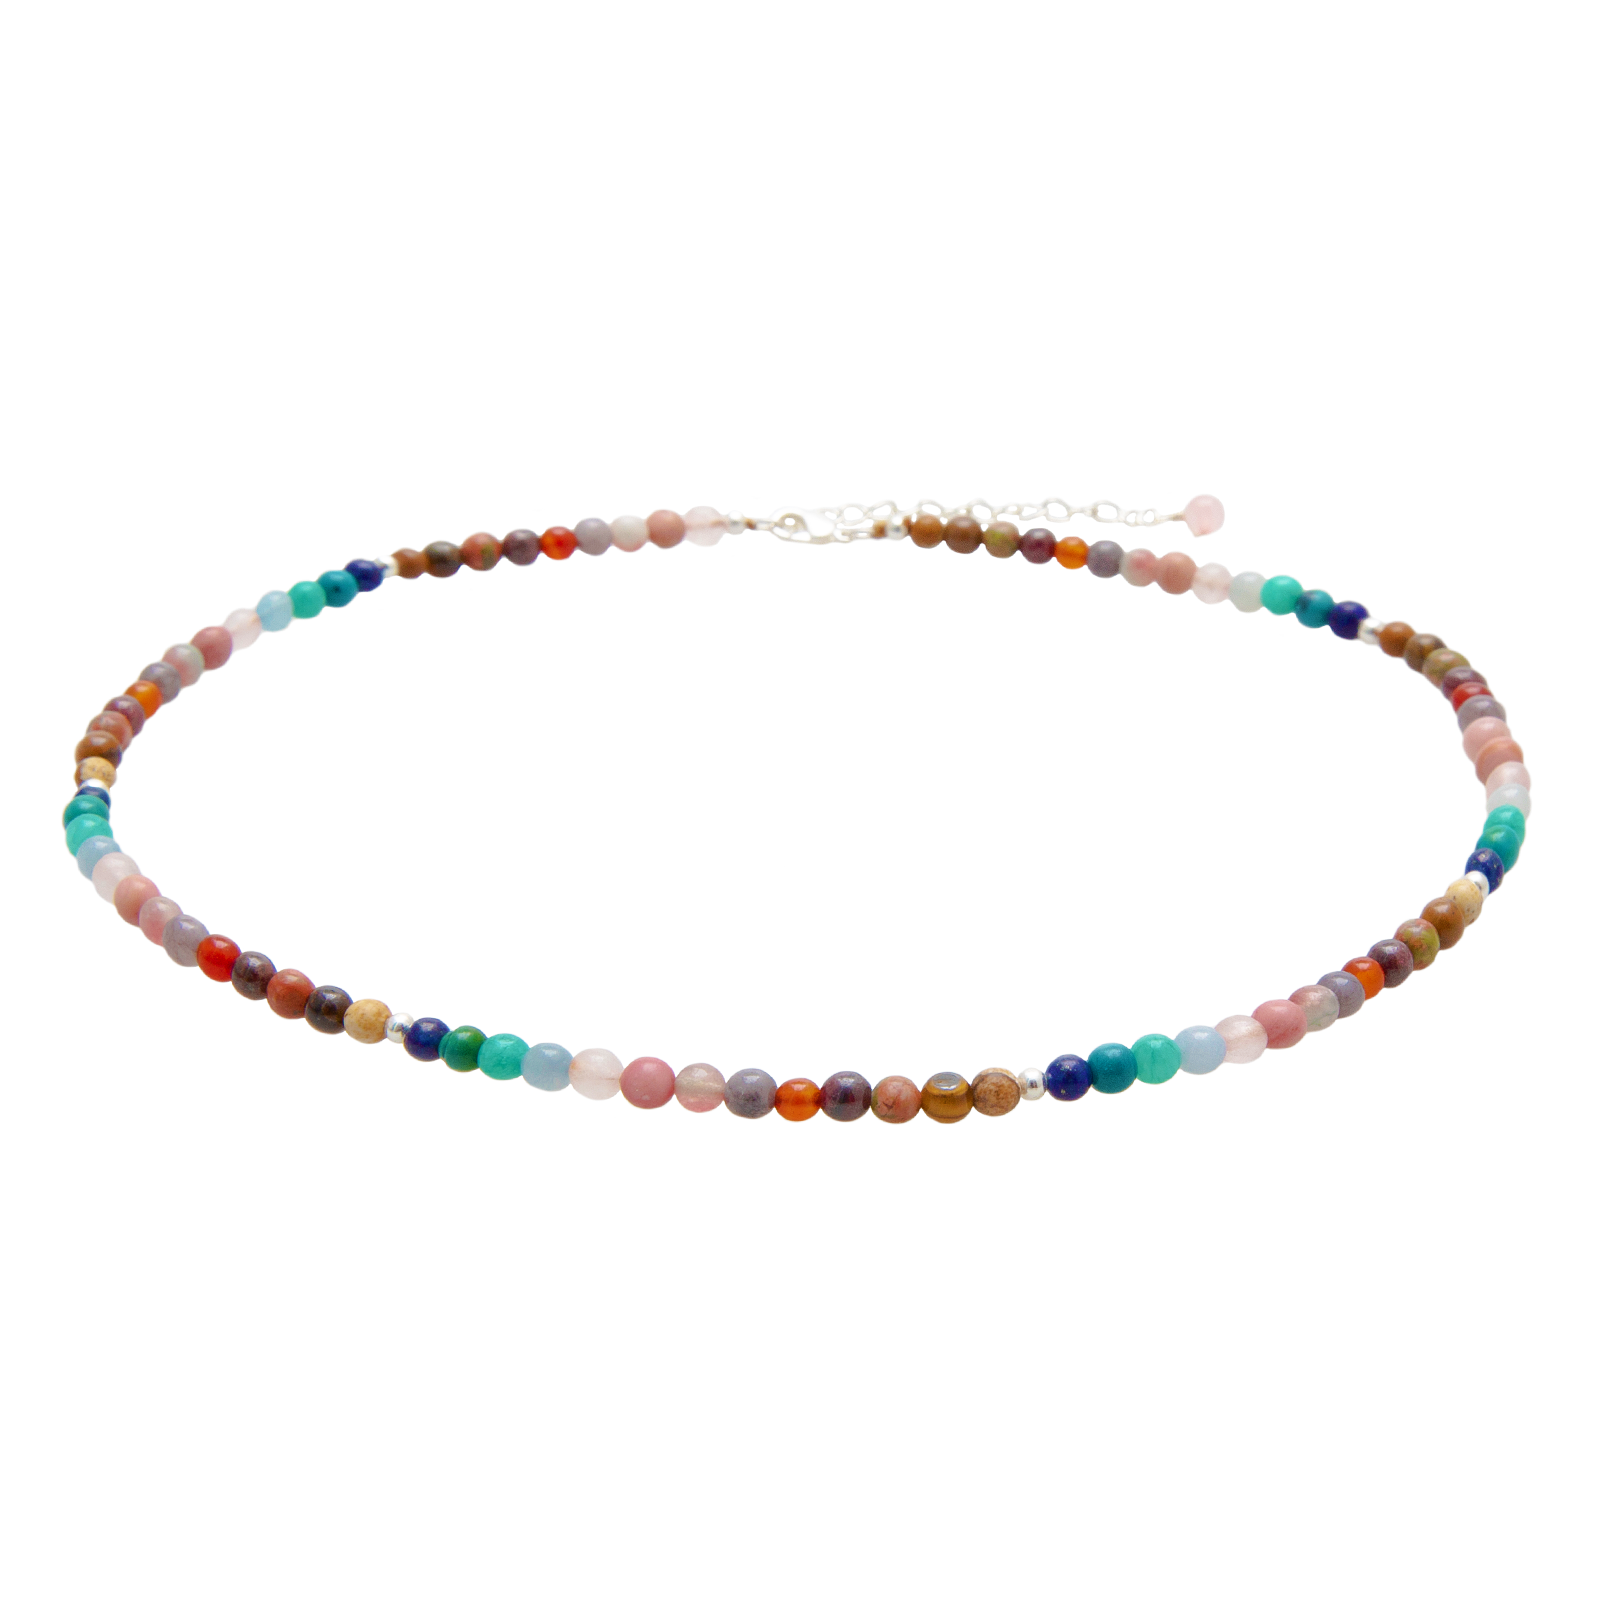 4mm multicolor stone healing necklace with a gold chain